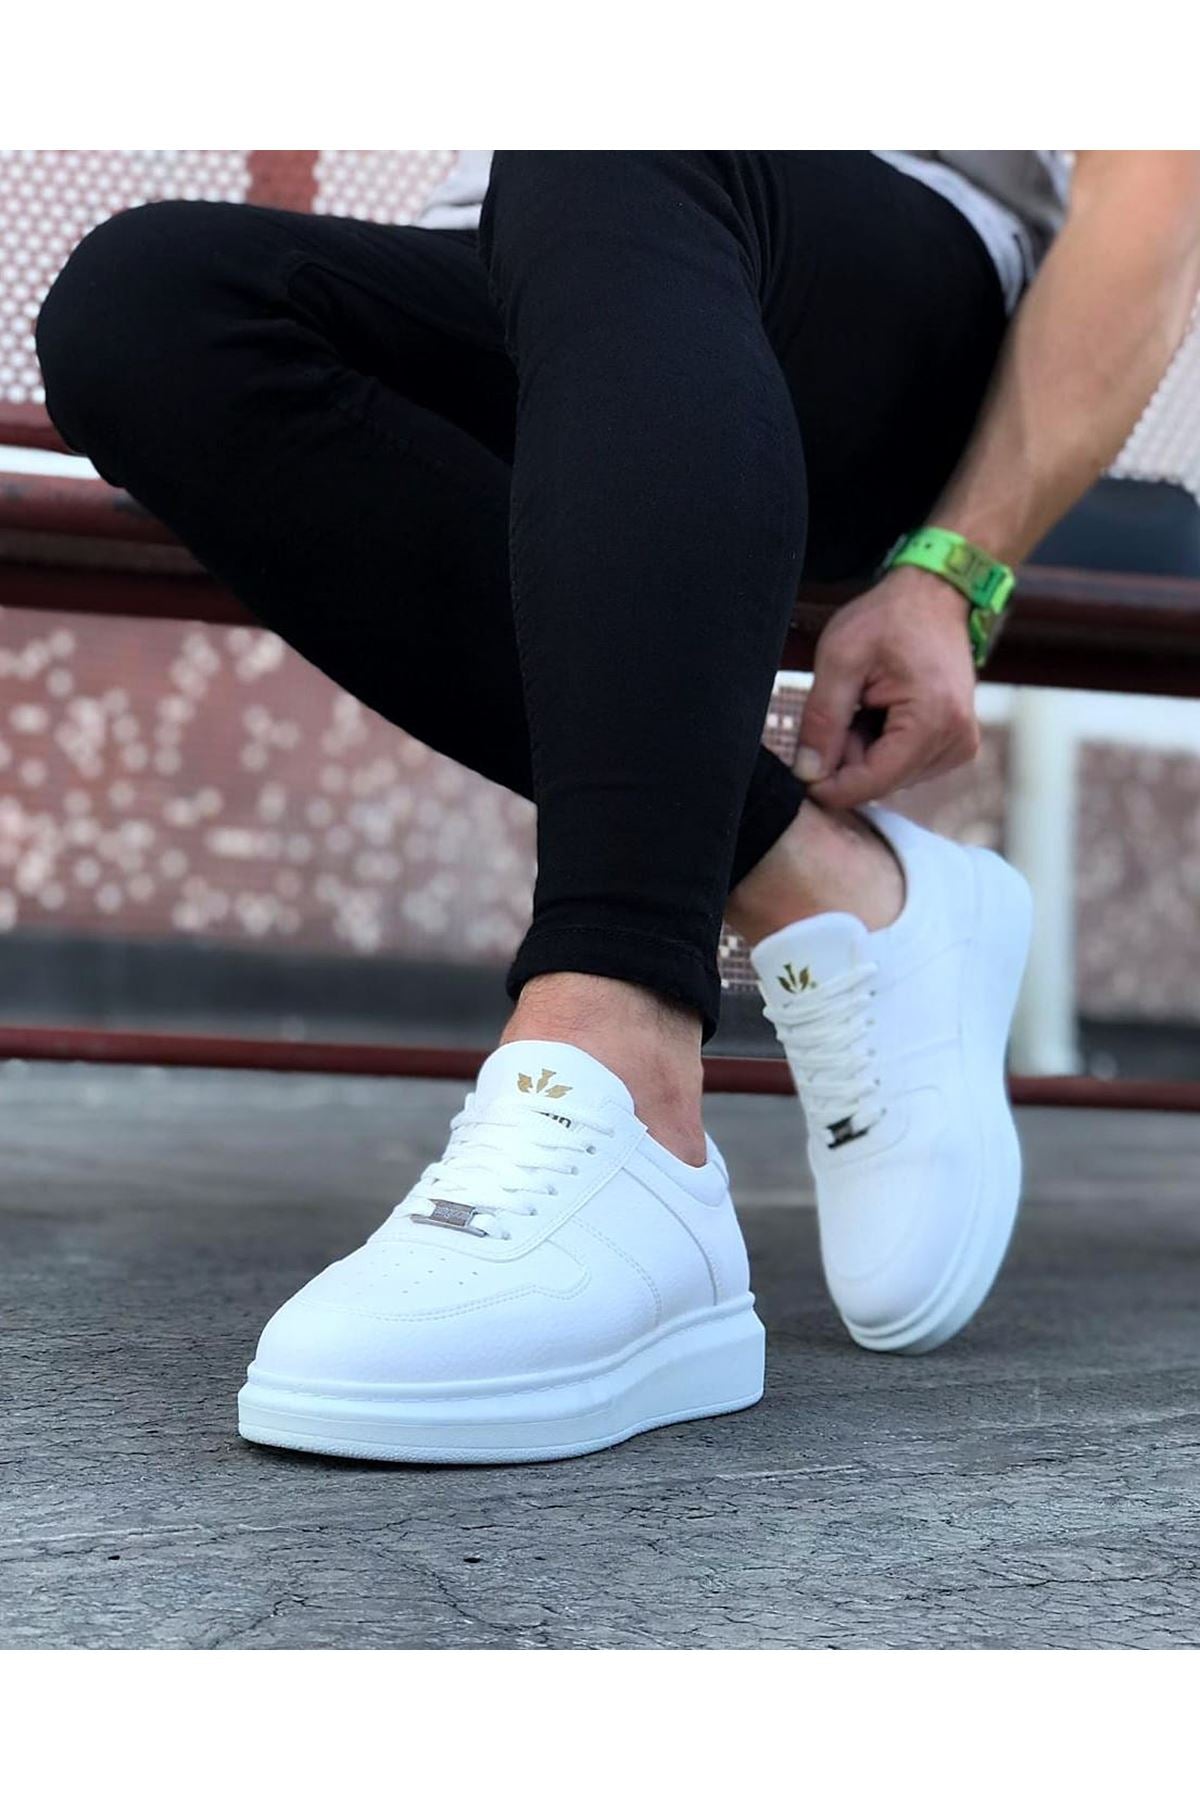 WG011 White Men's Casual Shoes - STREETMODE ™